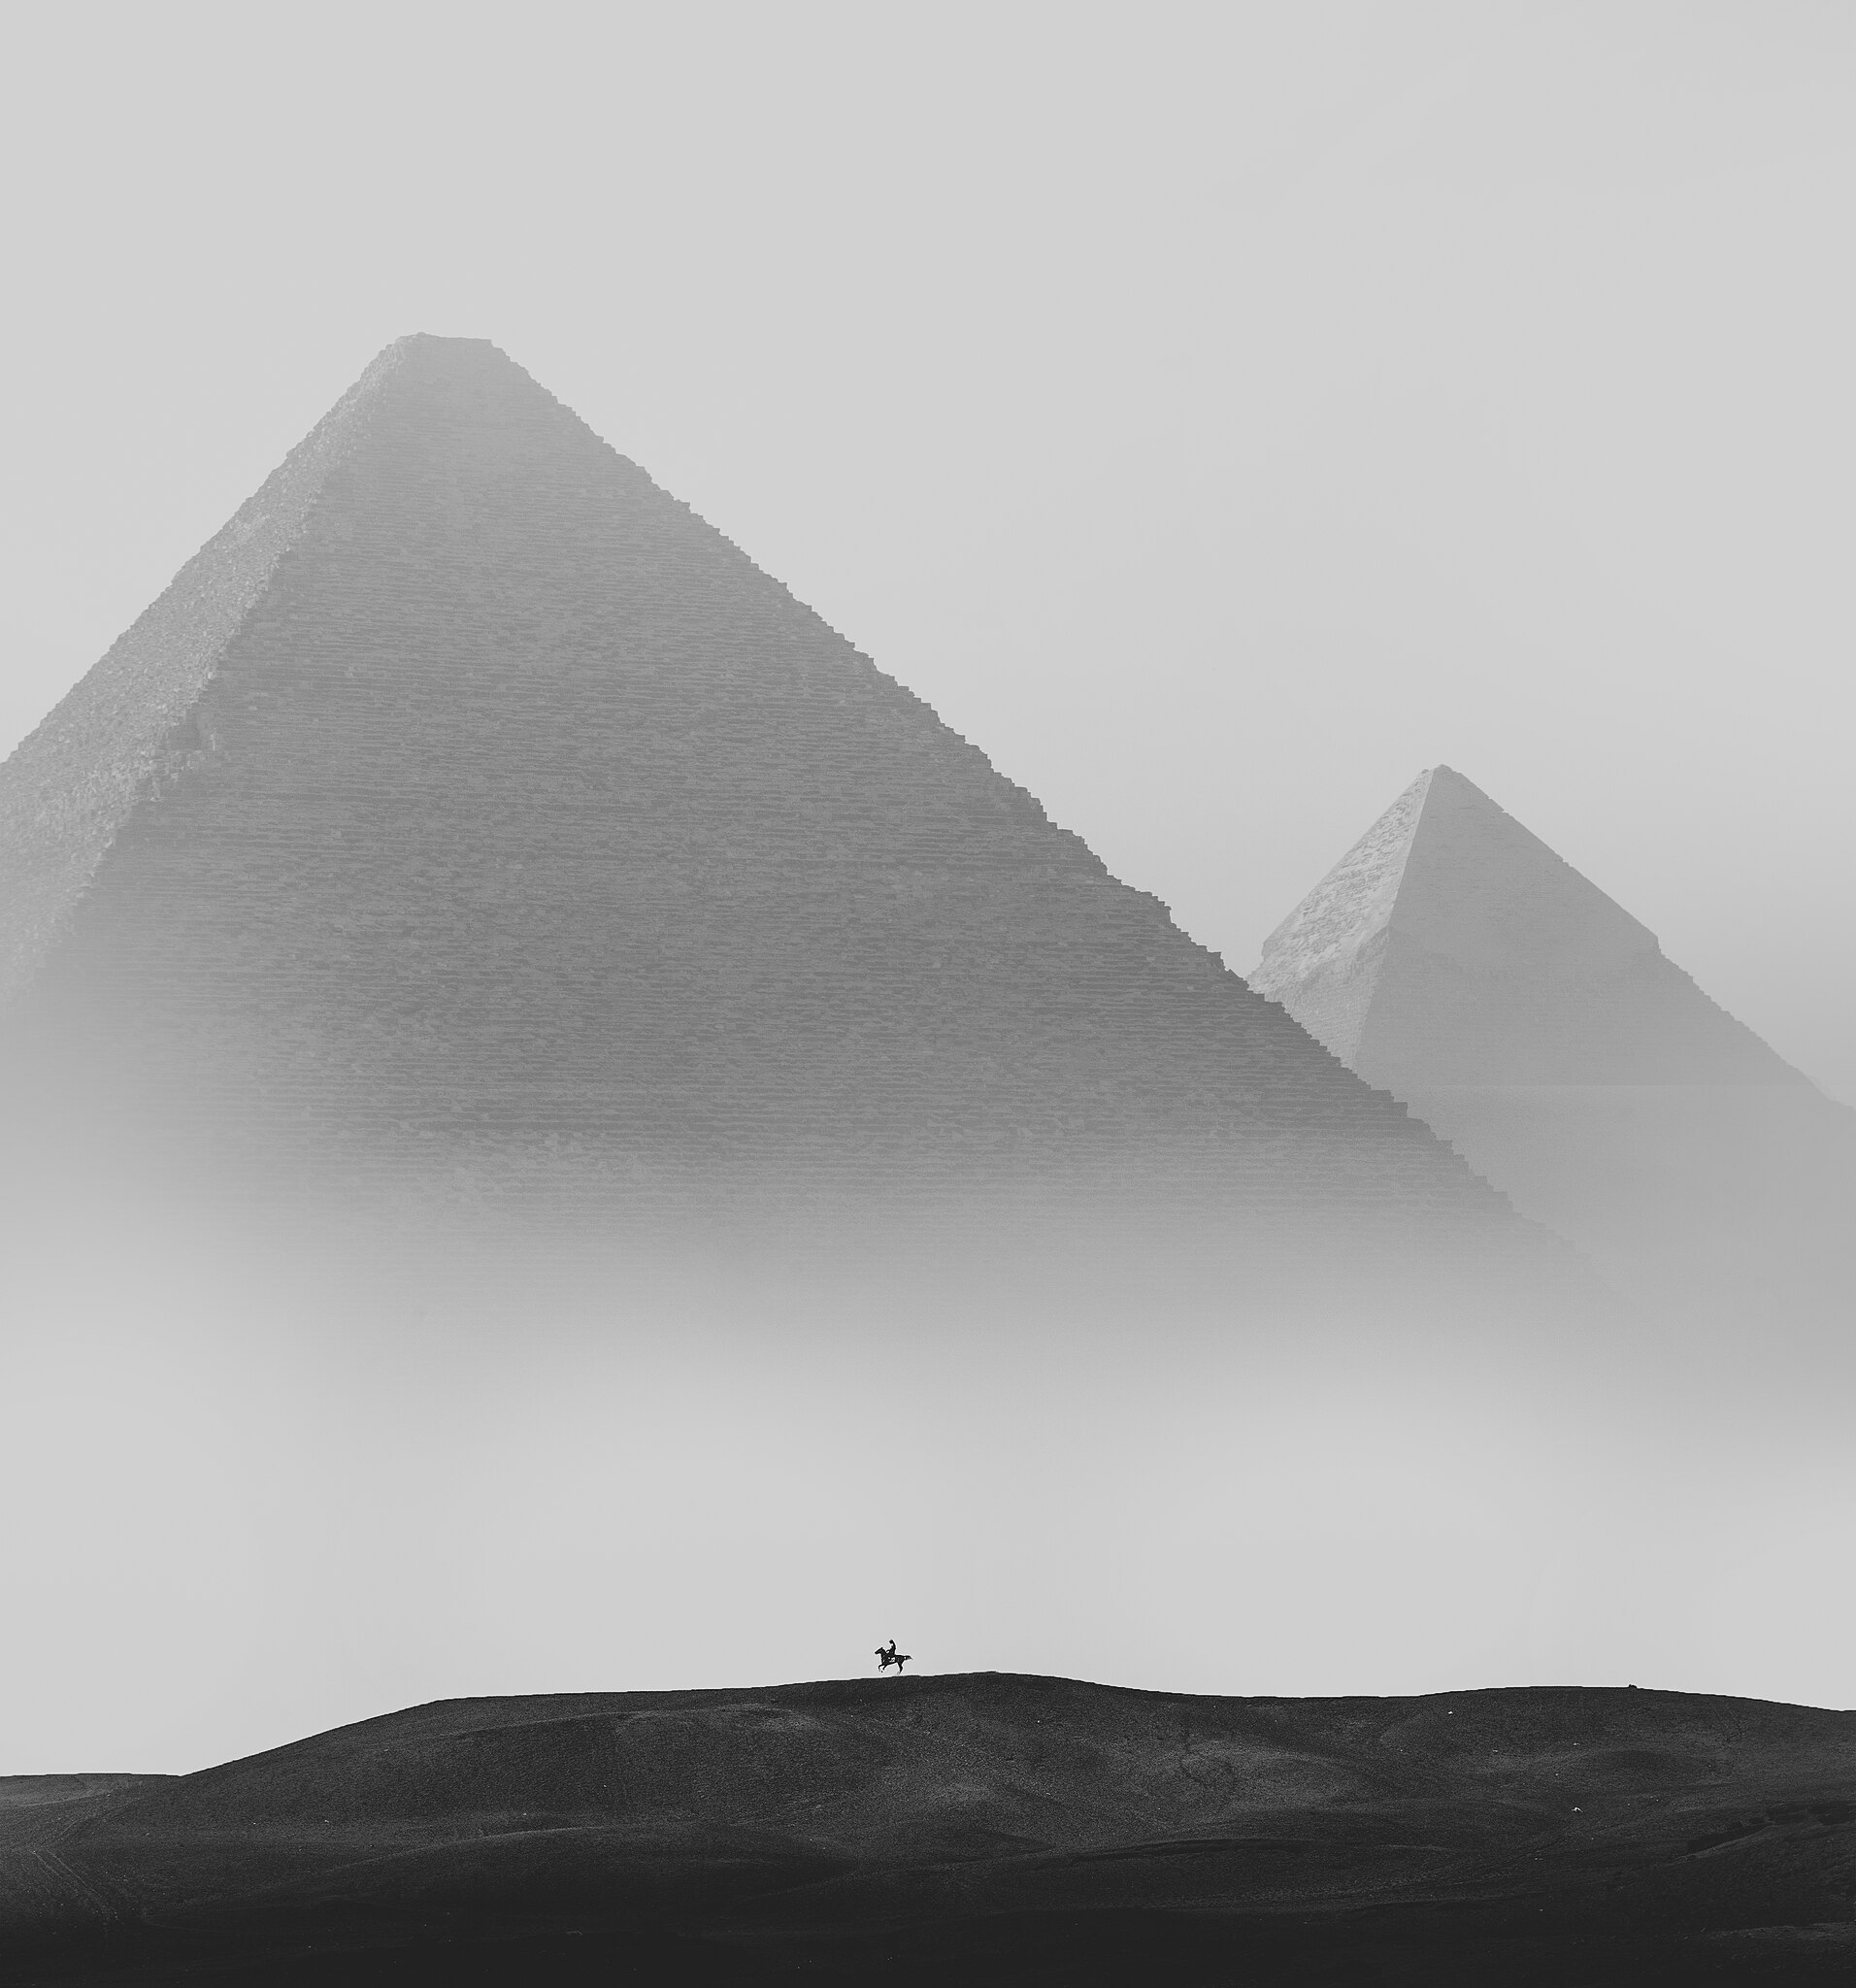 Black and white photography of the Giza Pyramids in Egypt with a horse rider in the foreground